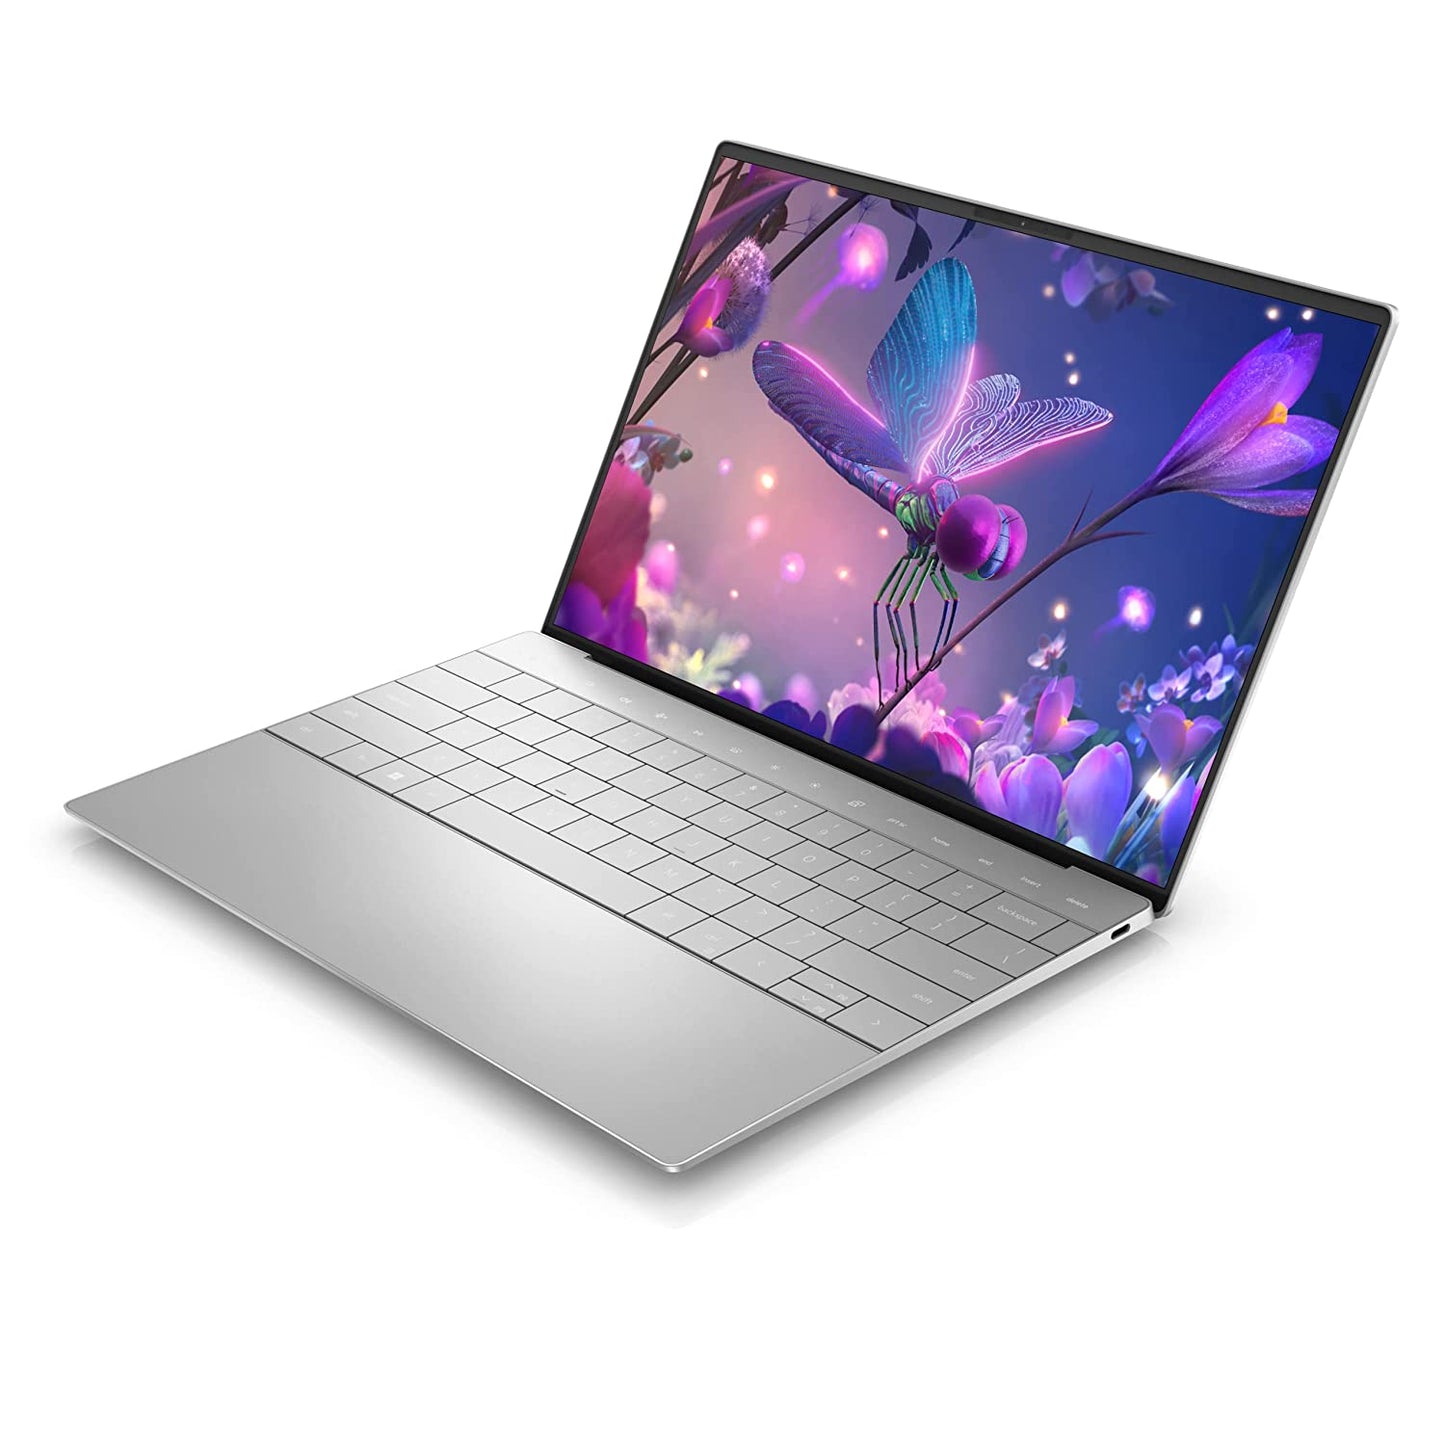 Dell XPS 13 Plus Laptop Intel i5-1240P 16GB LP DDR5 & 512GB SSD Win 11 + Office H&S 2021 13.4" UDH+ AR Infinity Edge 500 nits Touch Backlit Keyboard Fingerprint Reader Platinum D560072WIN9S